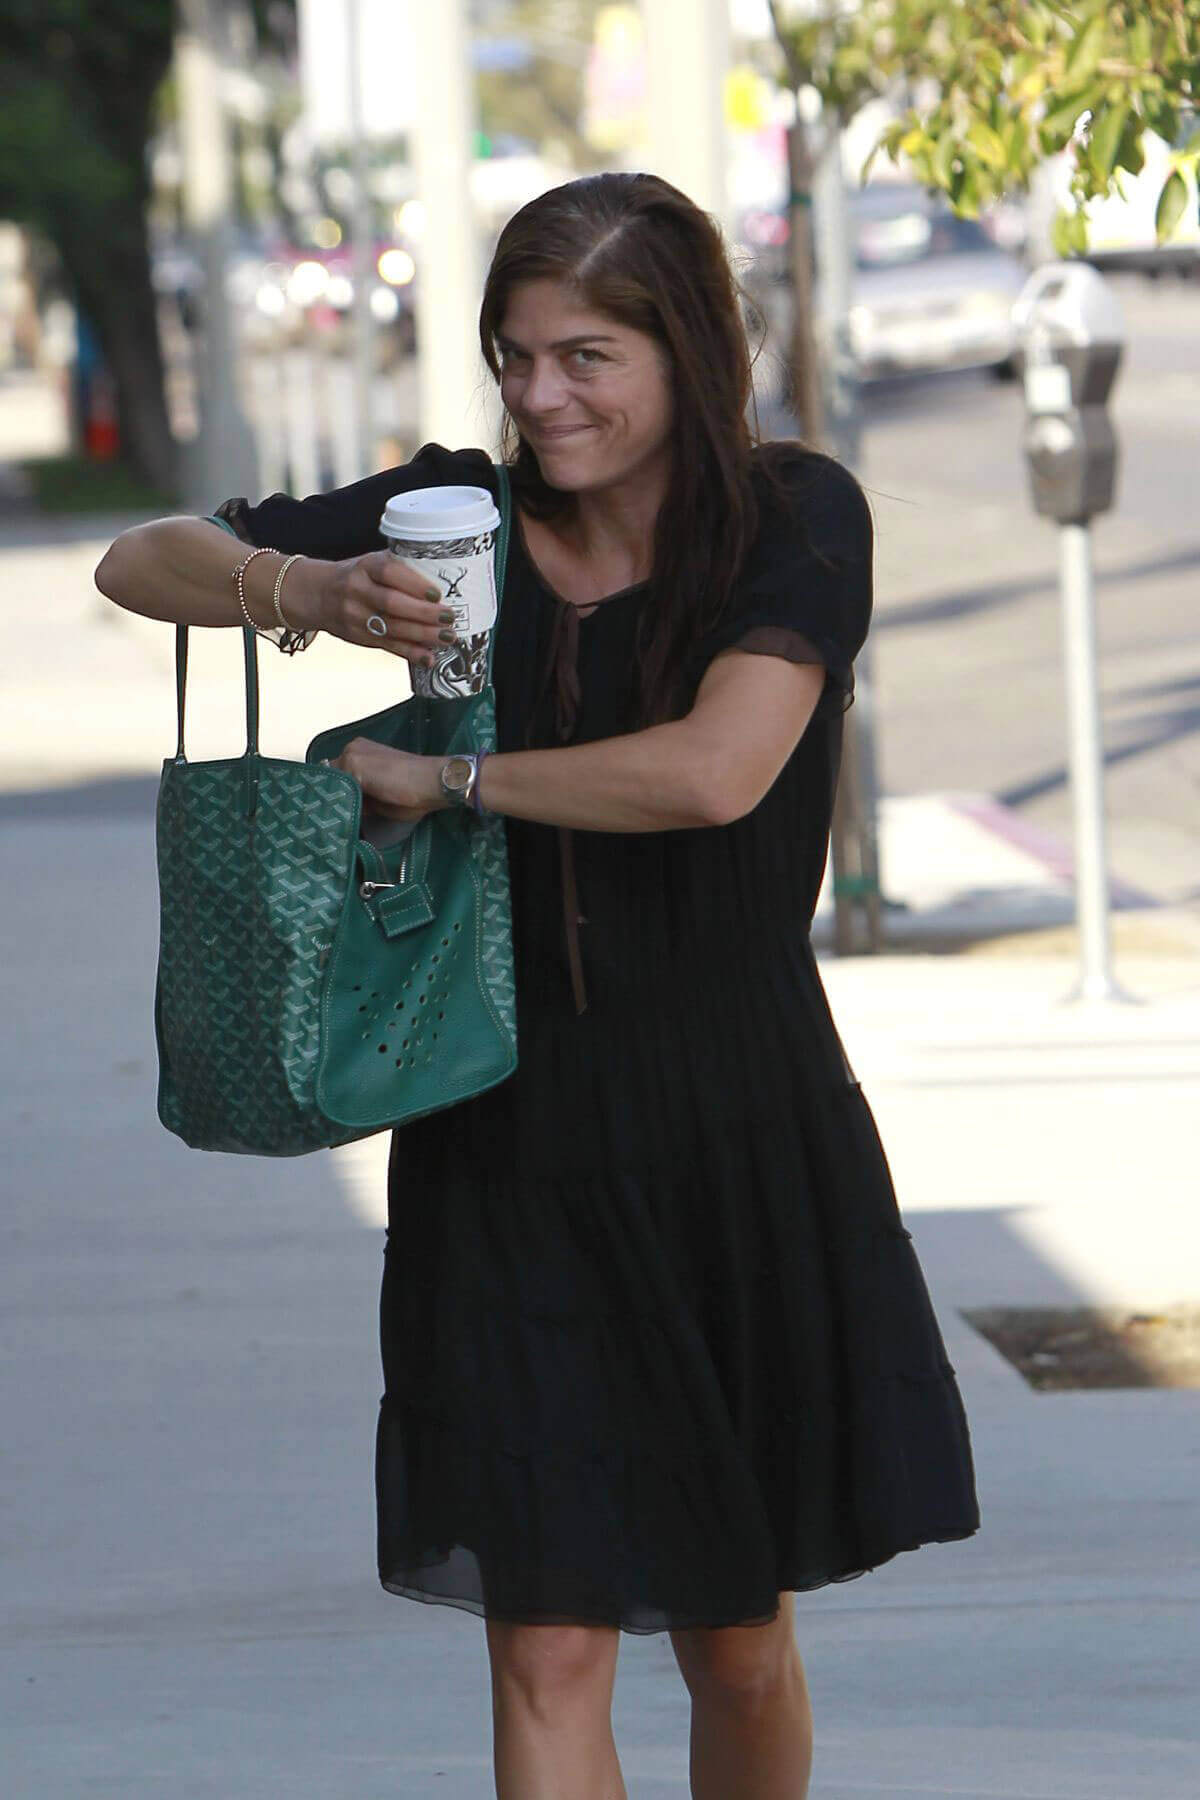 Selma Blair wears black dress out shopping in Los Angeles